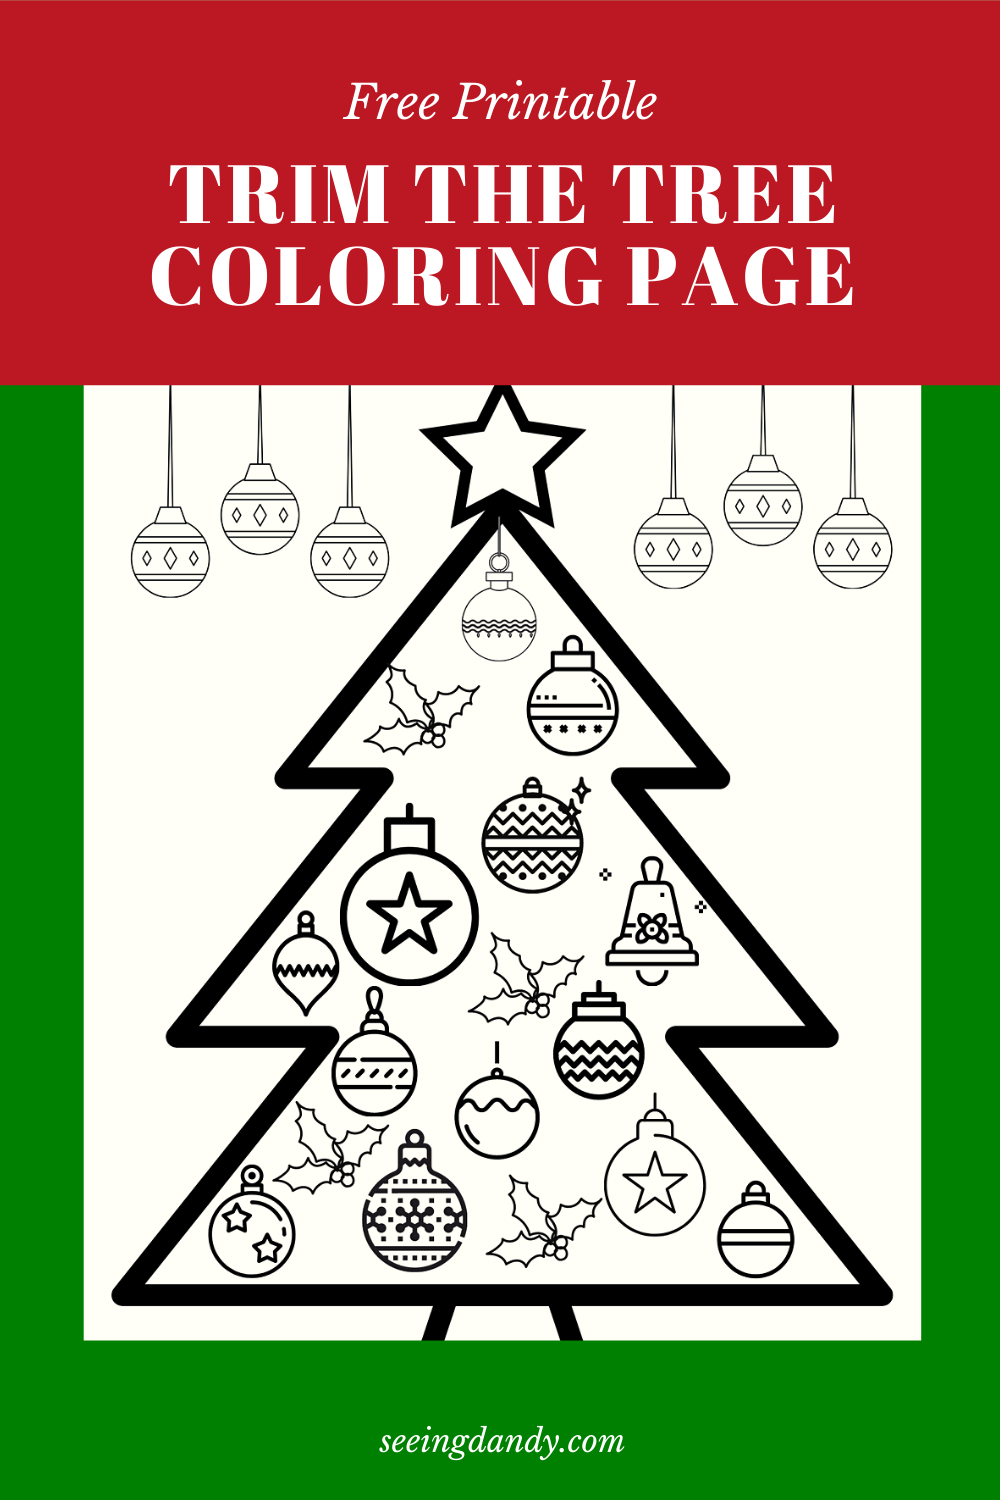 kids christmas coloring page, trim the tree, free printable, coloring sheet, kids crafts, school christmas party, holiday fun, christmas DIY